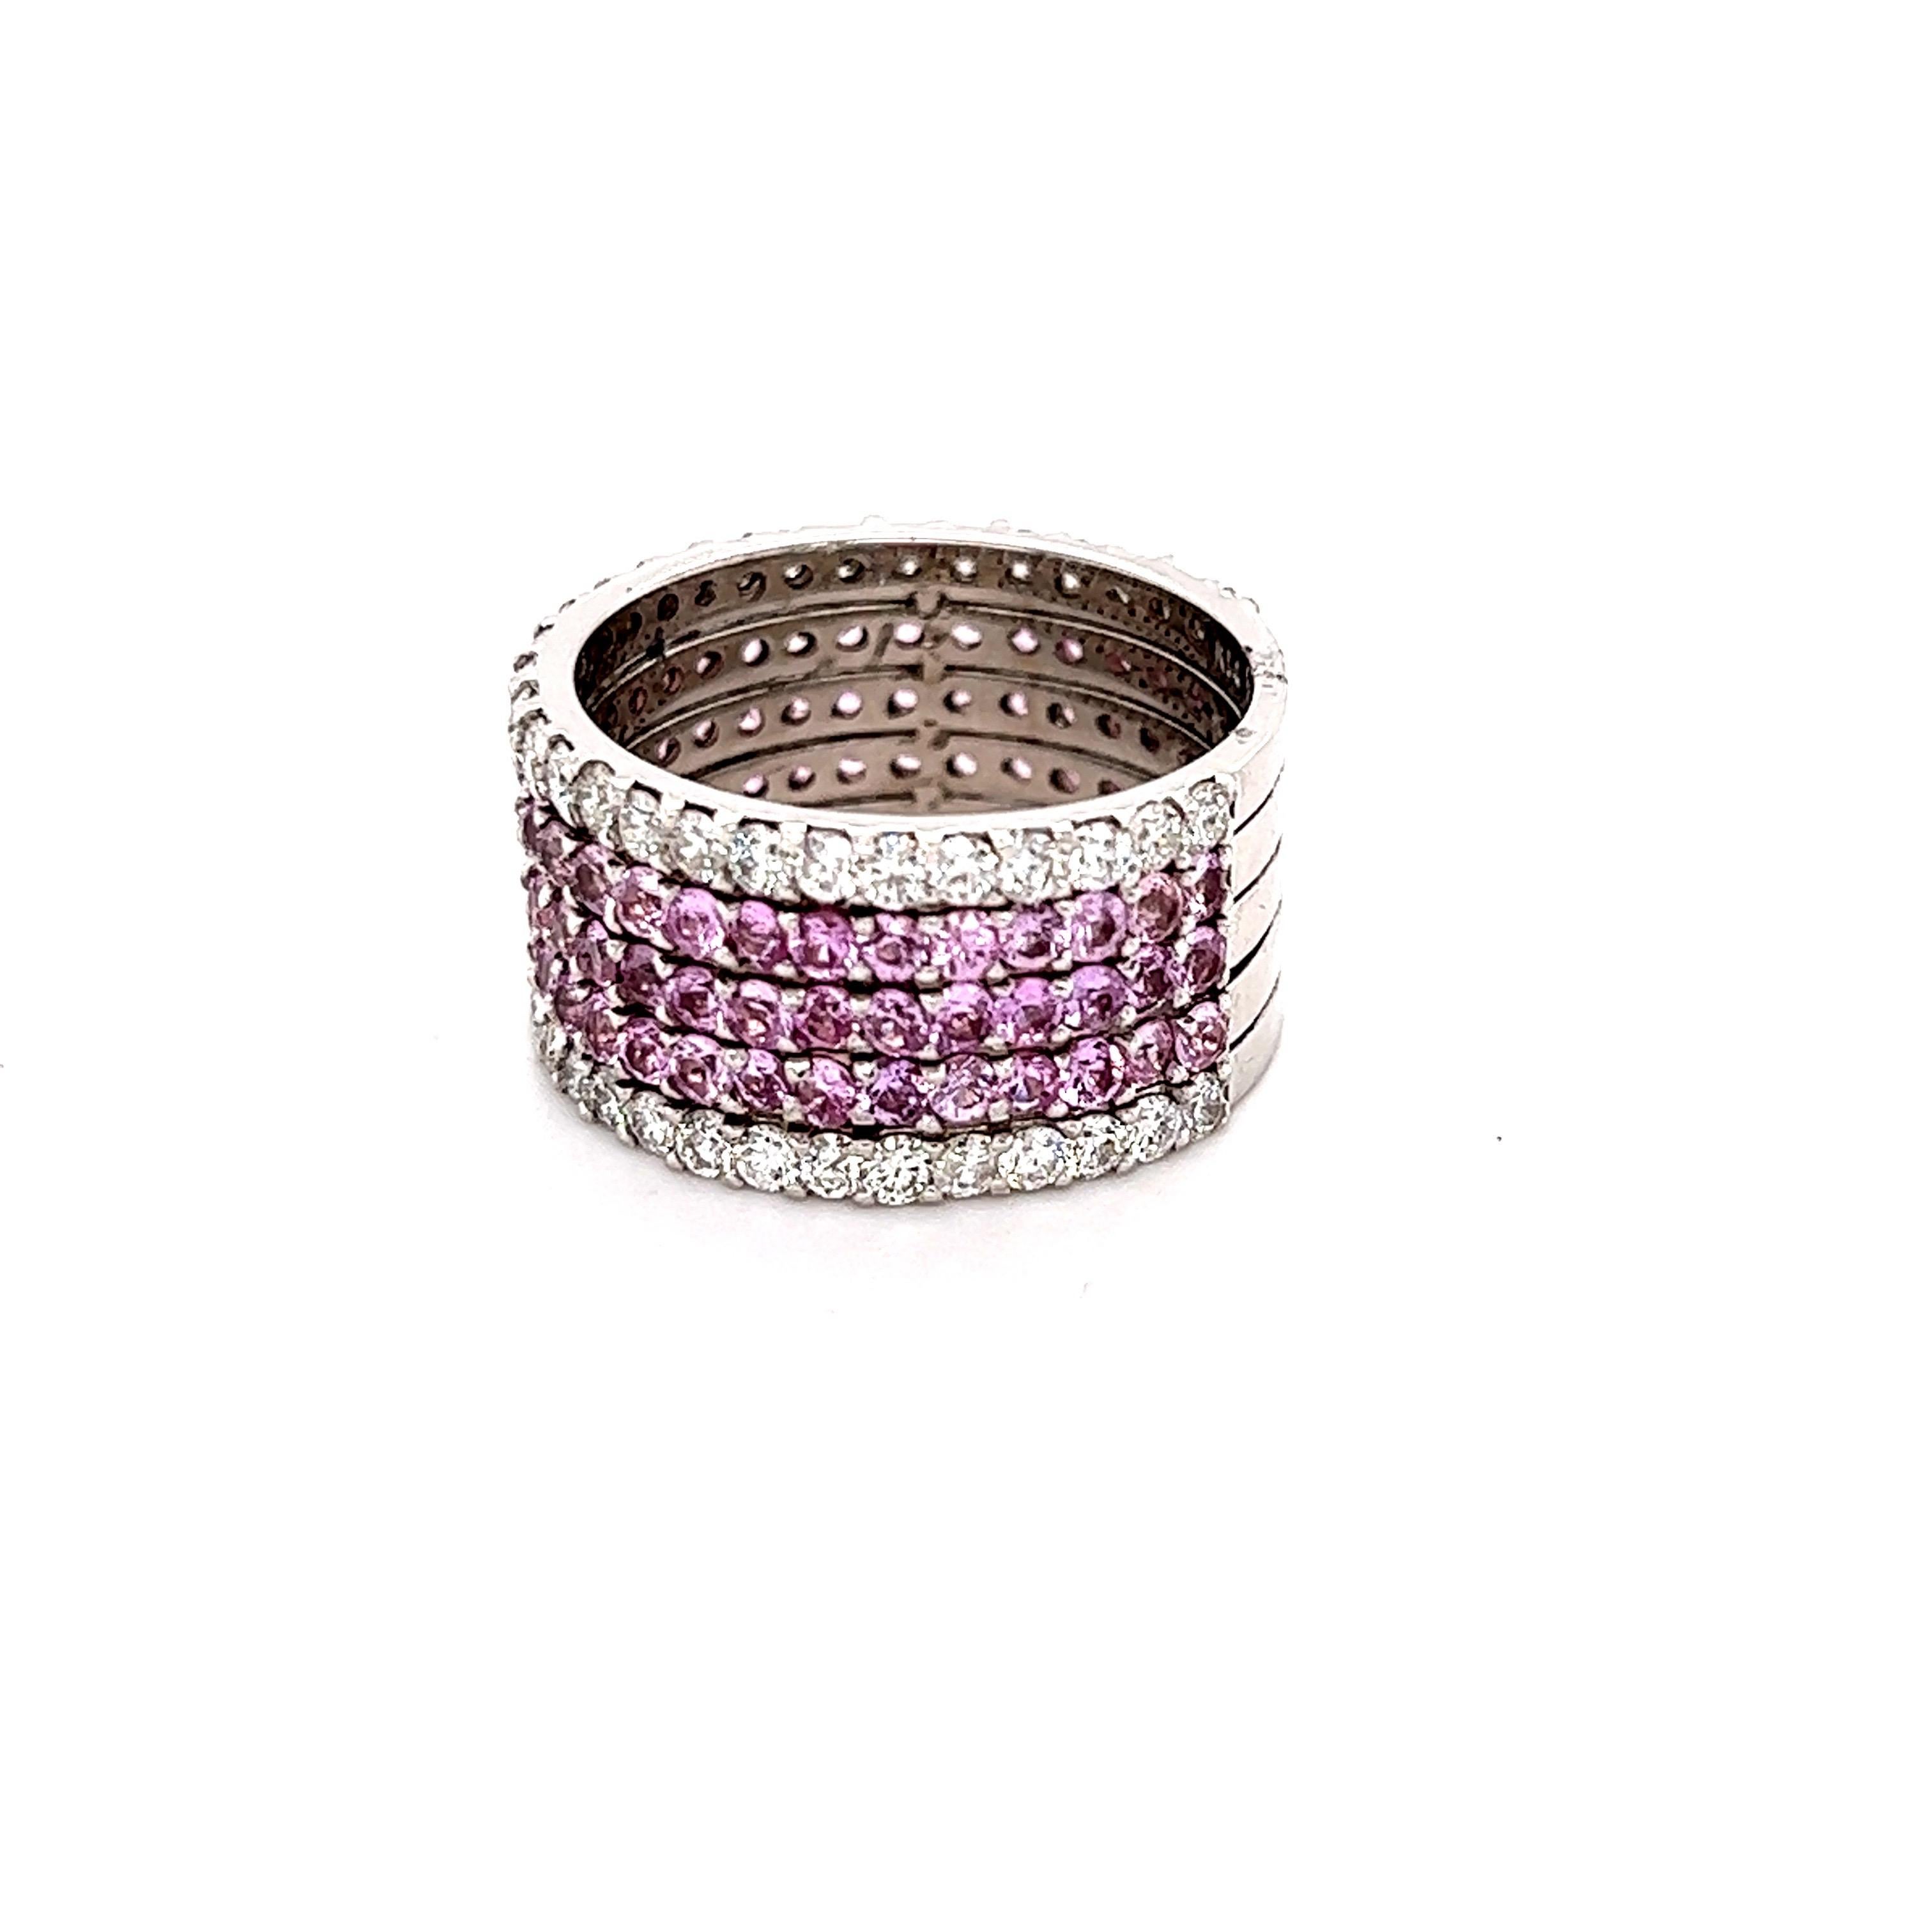 This ring has 90 Natural Round Cut Light Pink Sapphires that weigh 2.72 Carats as well as 60 Round Cut Diamonds that weigh 1.51 Carats. The total carat weight of this ring is 4.23 carats. 

Crafted in 14 Karat White Gold and weighs approximately 7.2